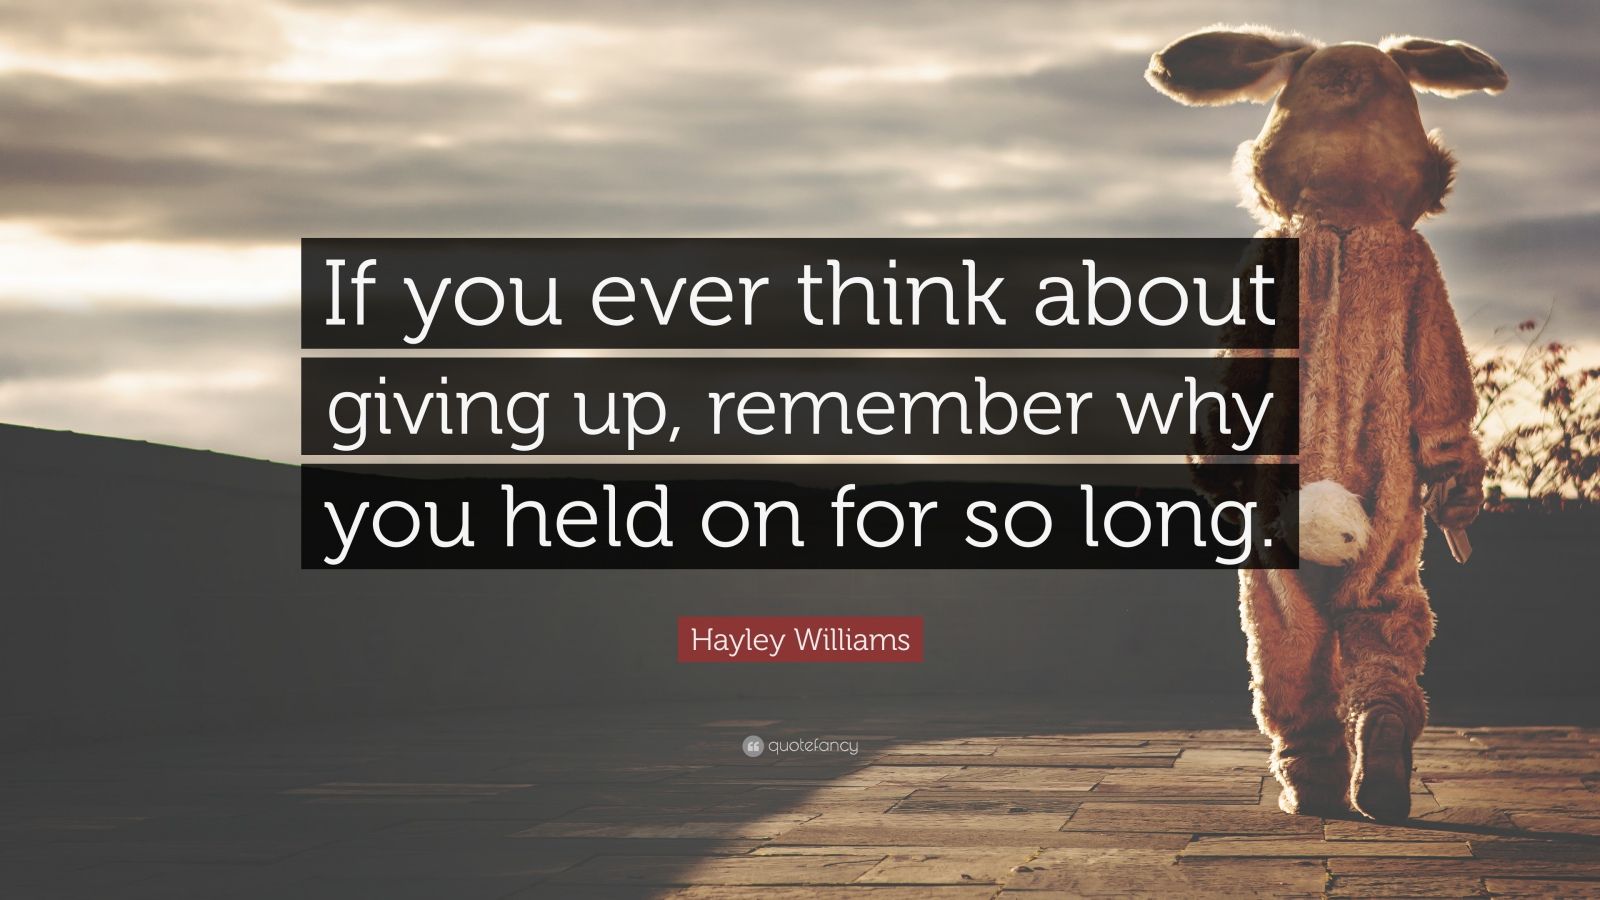 Hayley Williams Quote: “If you ever think about giving up, remember why